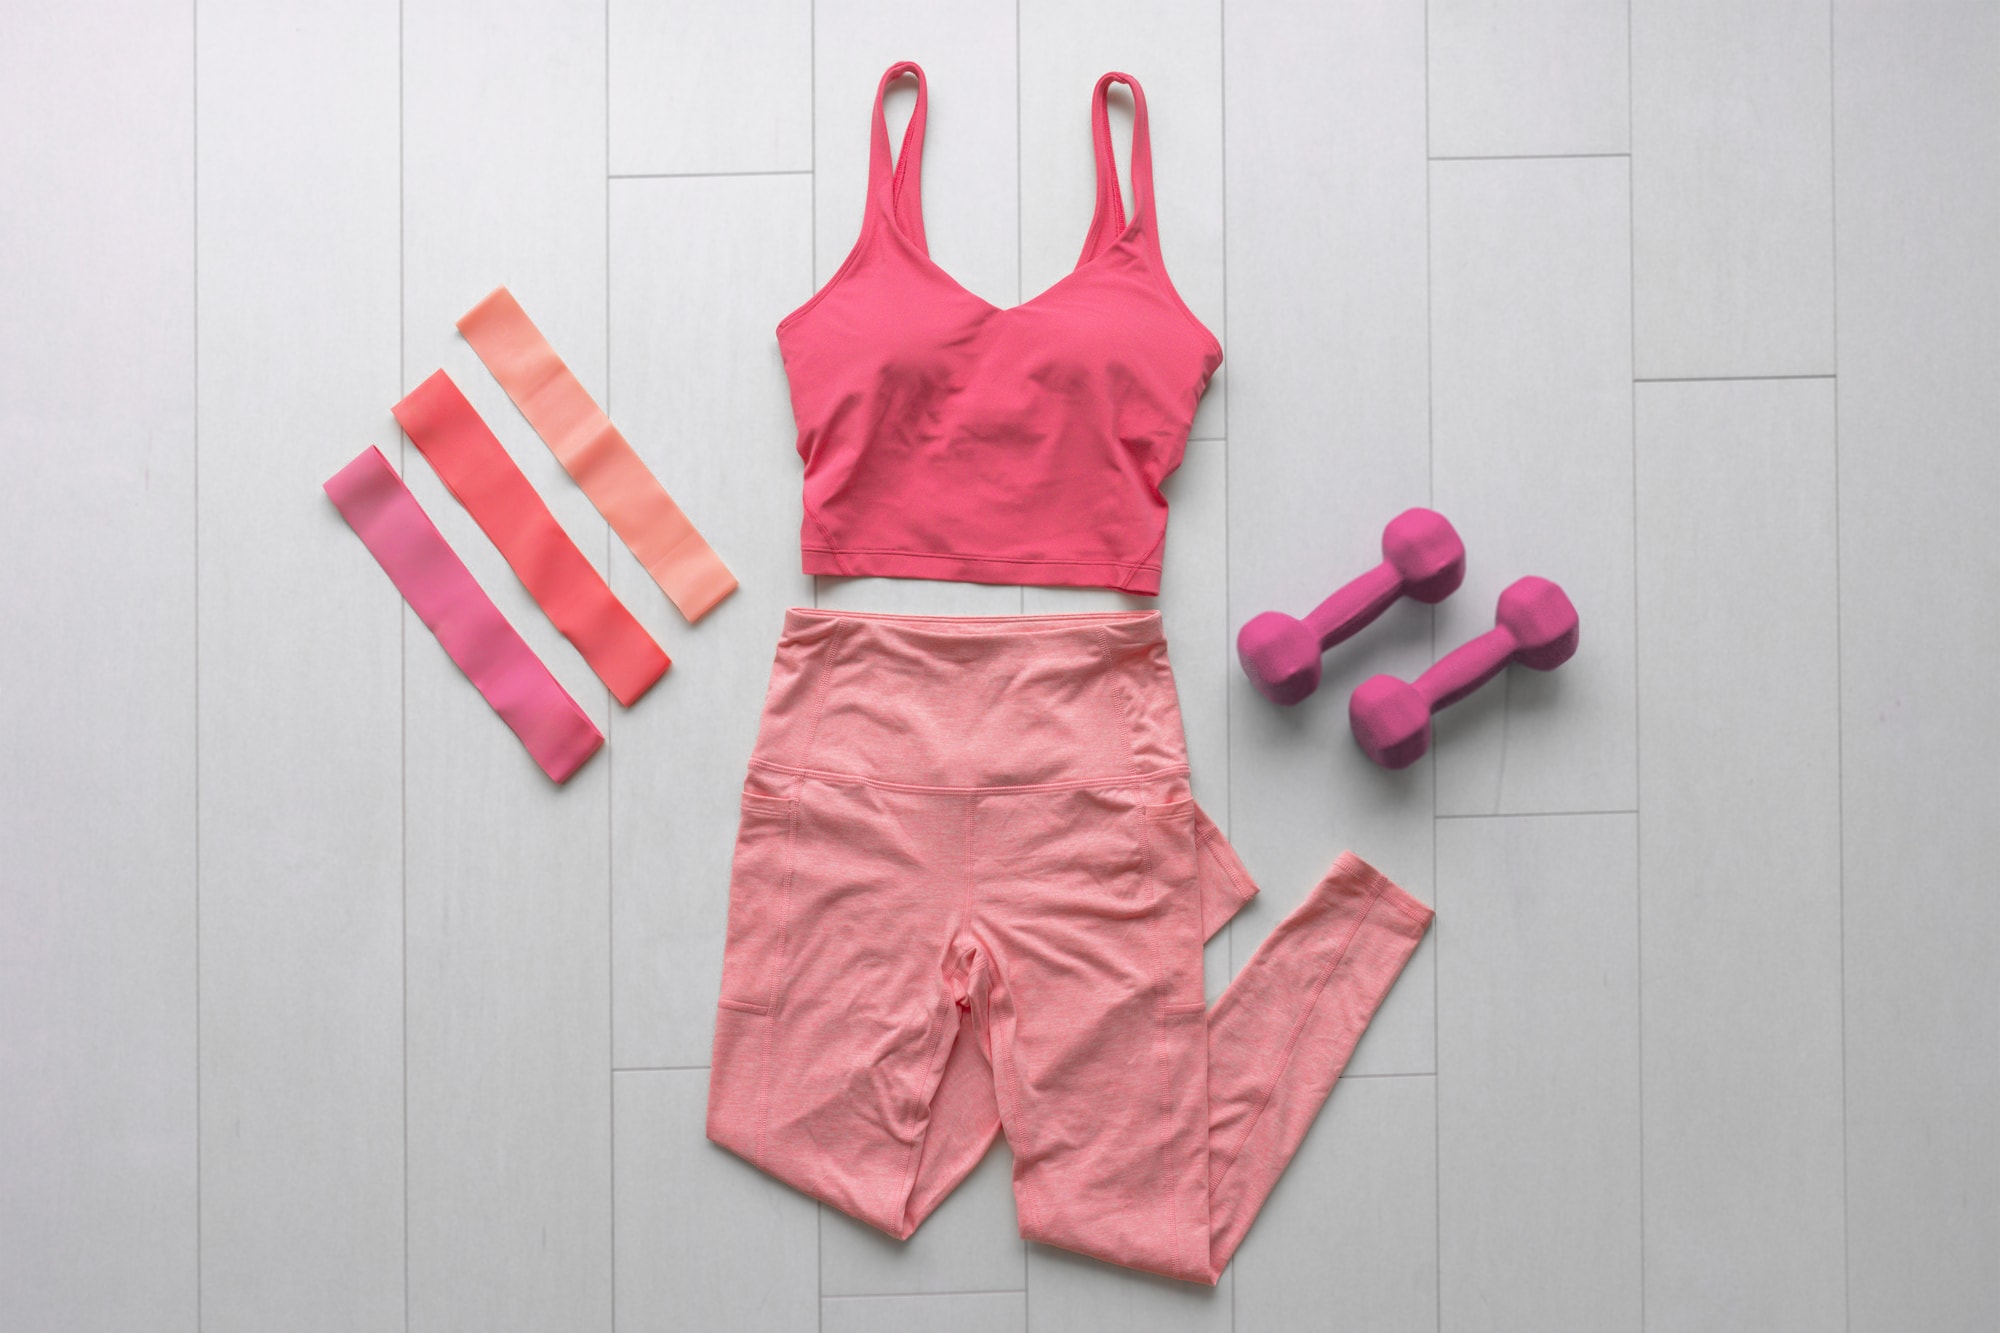 Work out in pink